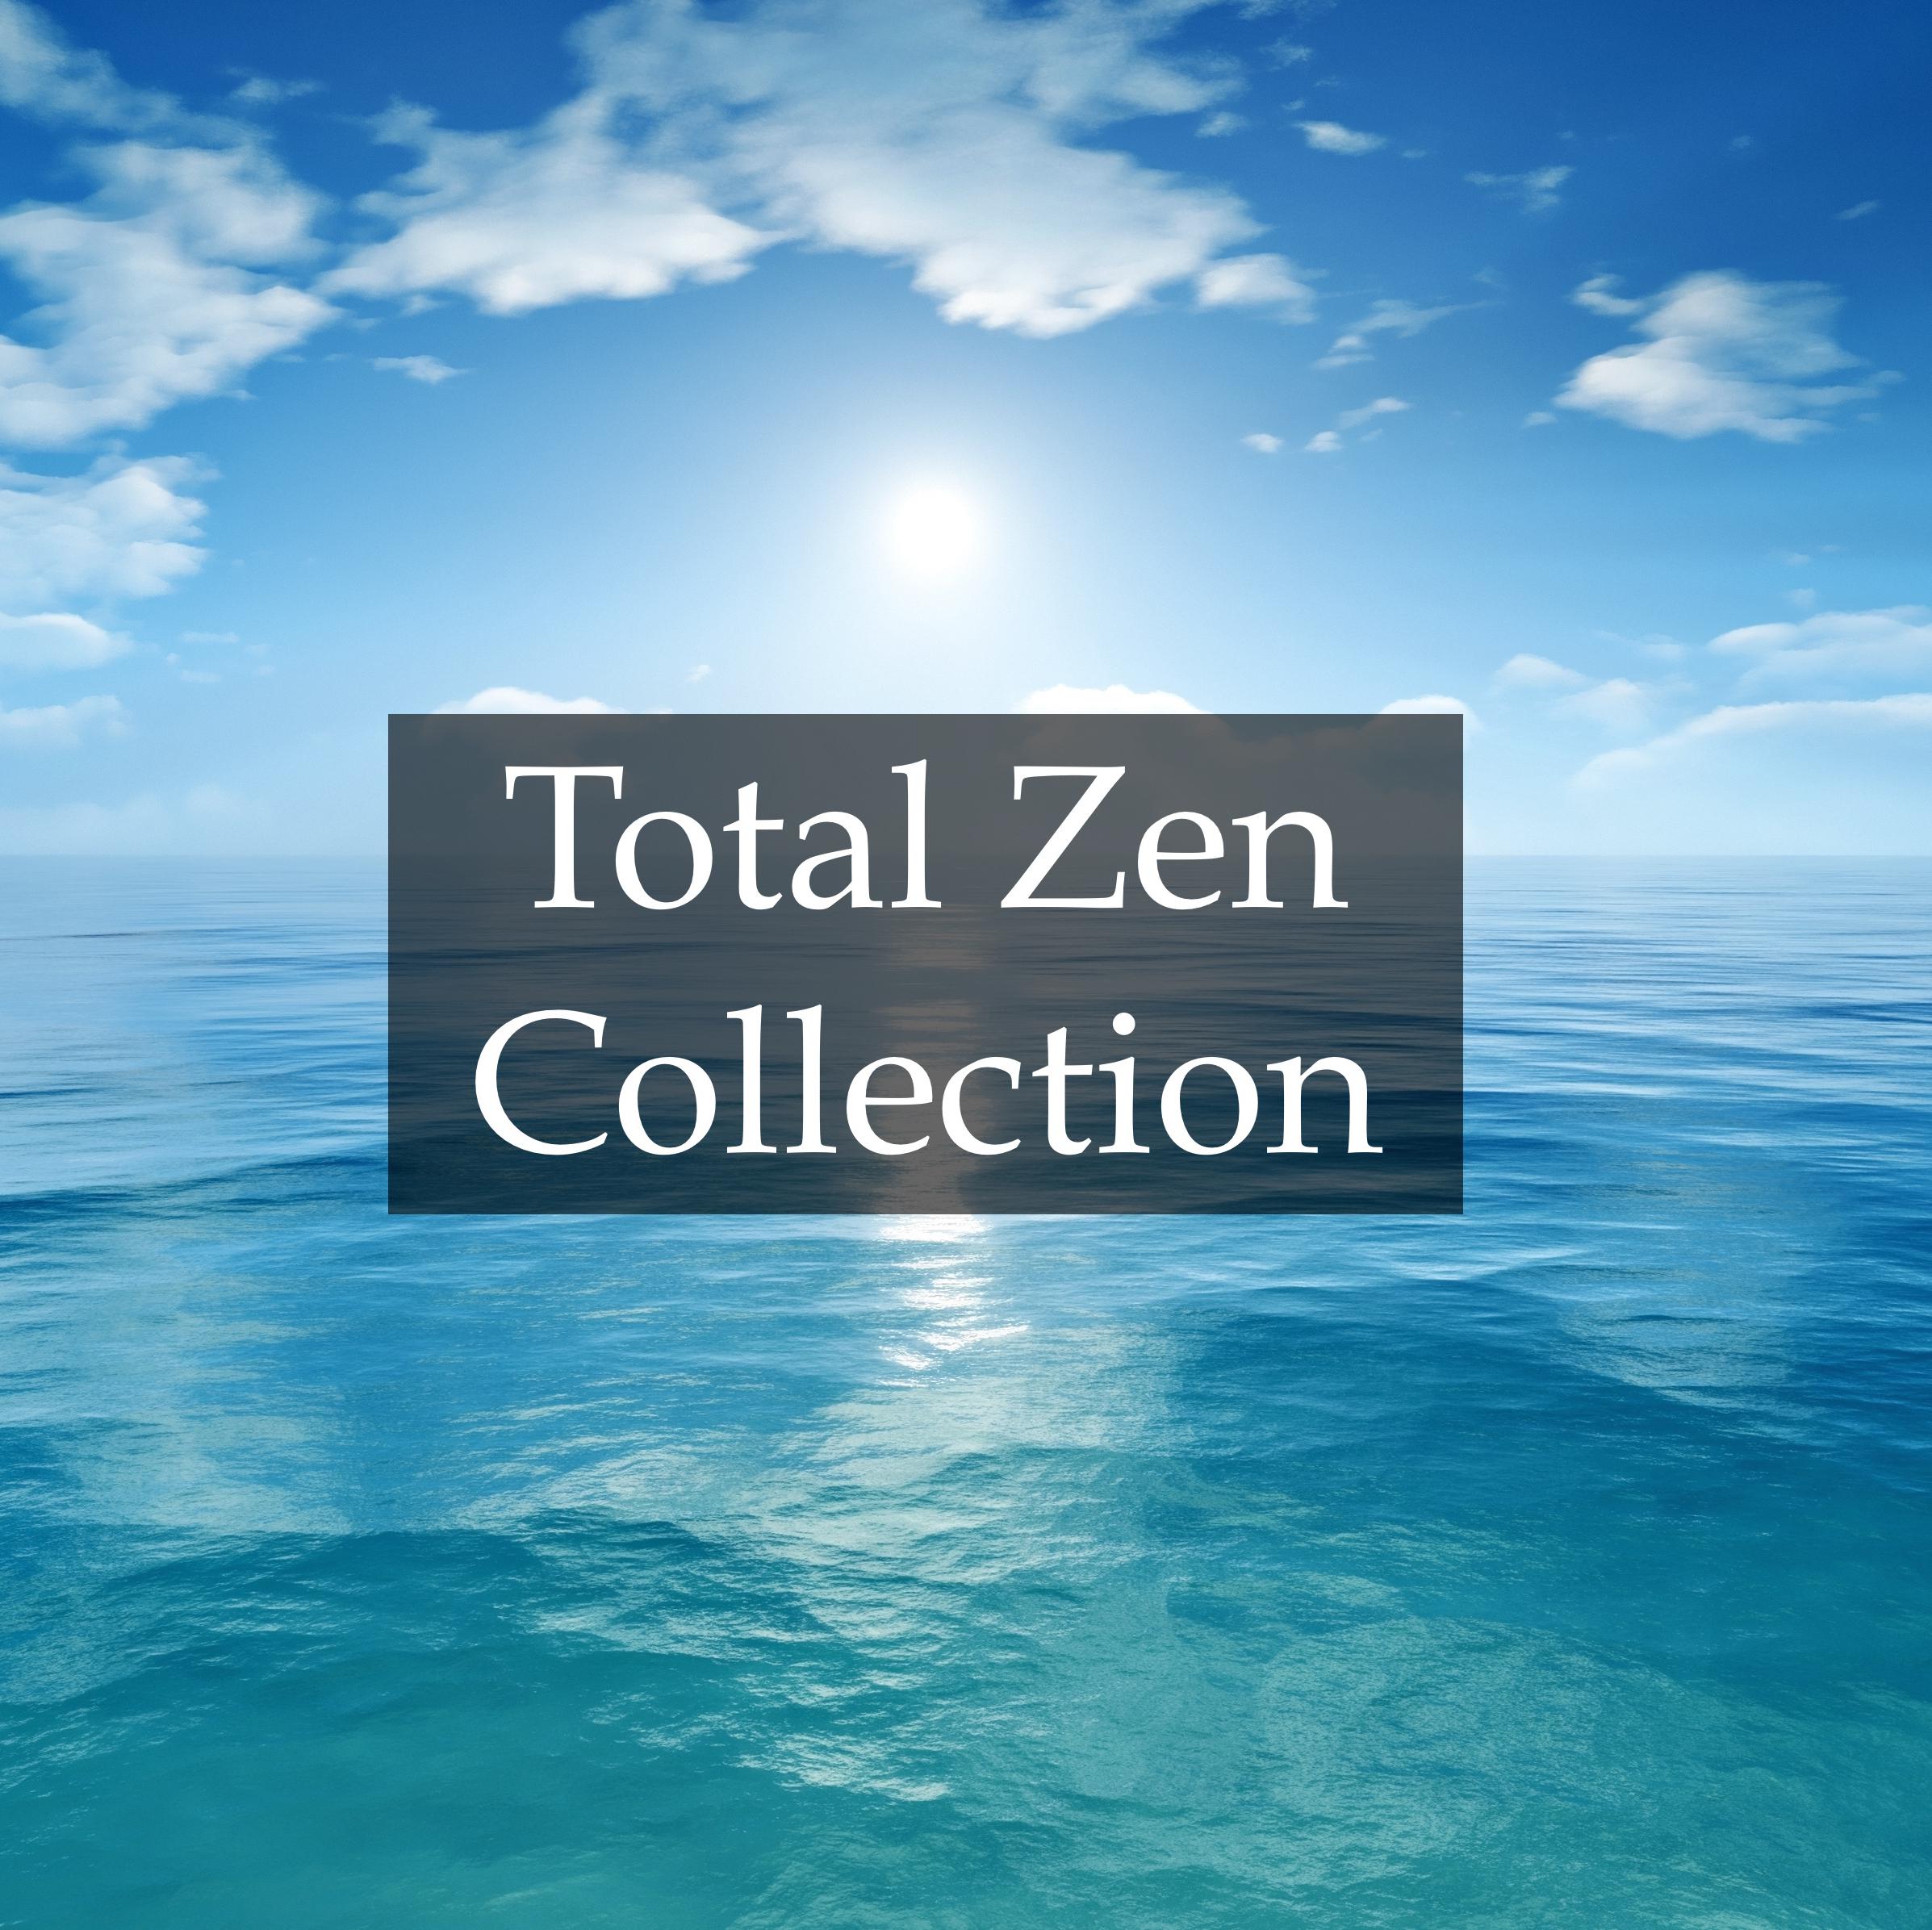 Total Zen Collection - Peaceful Water Relaxation for Mind, Body and Soul; Stress-Free Anxiety Relief & Help with Falling Asleep, Transcendental Meditation, and Deep Focus